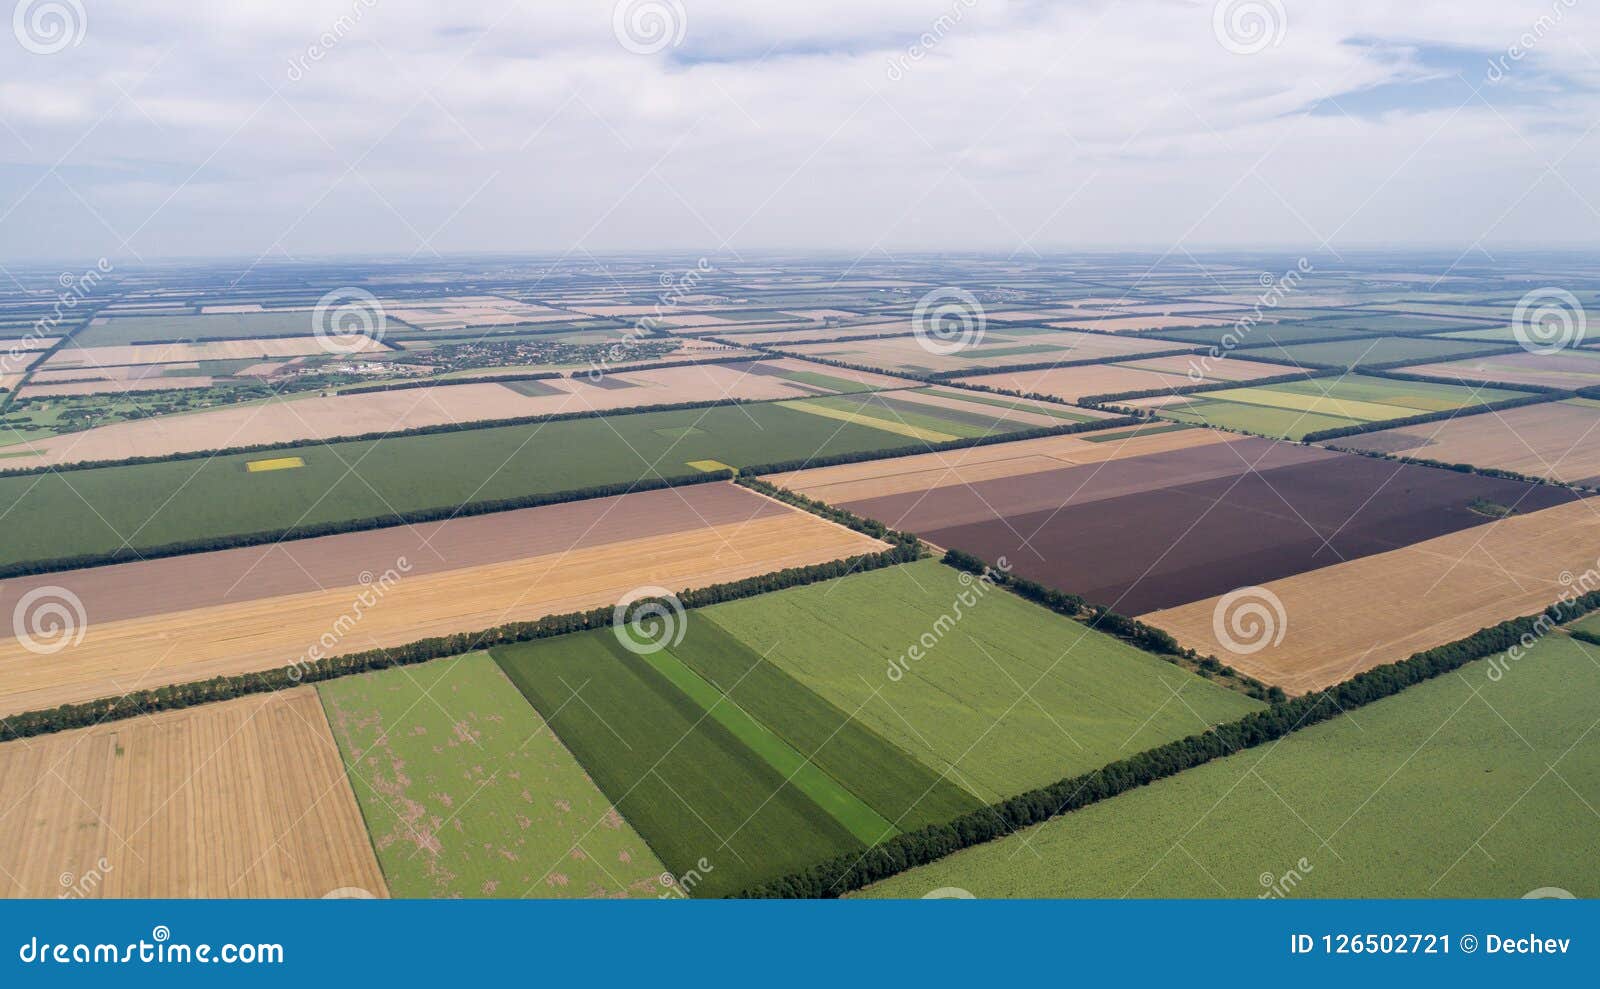 Aerial View of Fields with Various Types of Agriculture, Against Cloudy ...